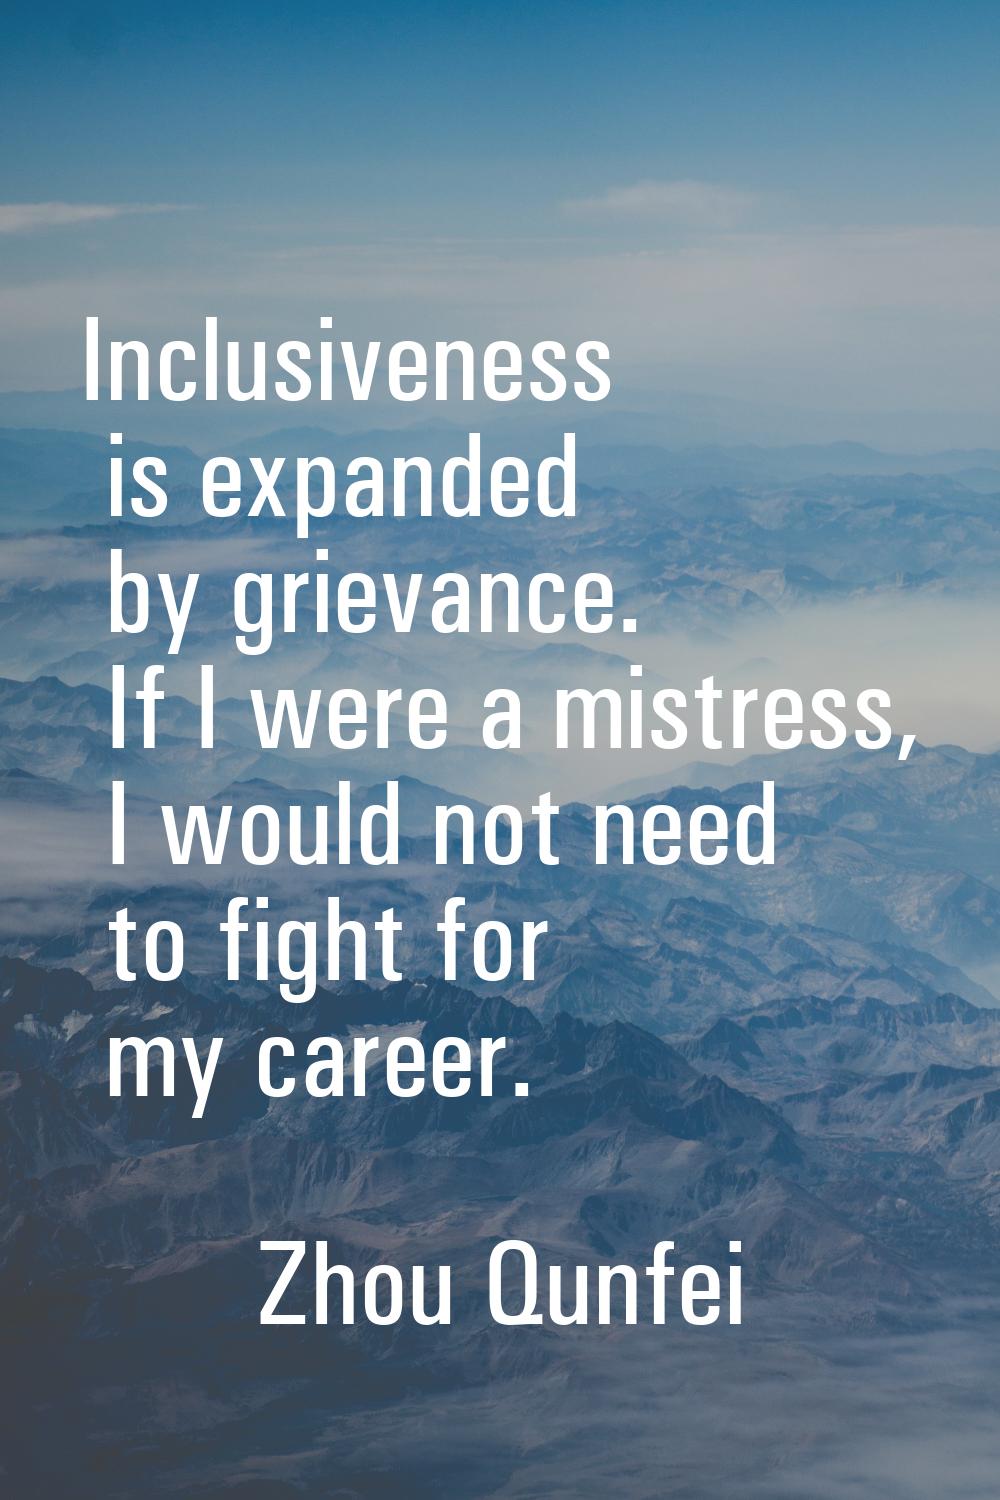 Inclusiveness is expanded by grievance. If I were a mistress, I would not need to fight for my care